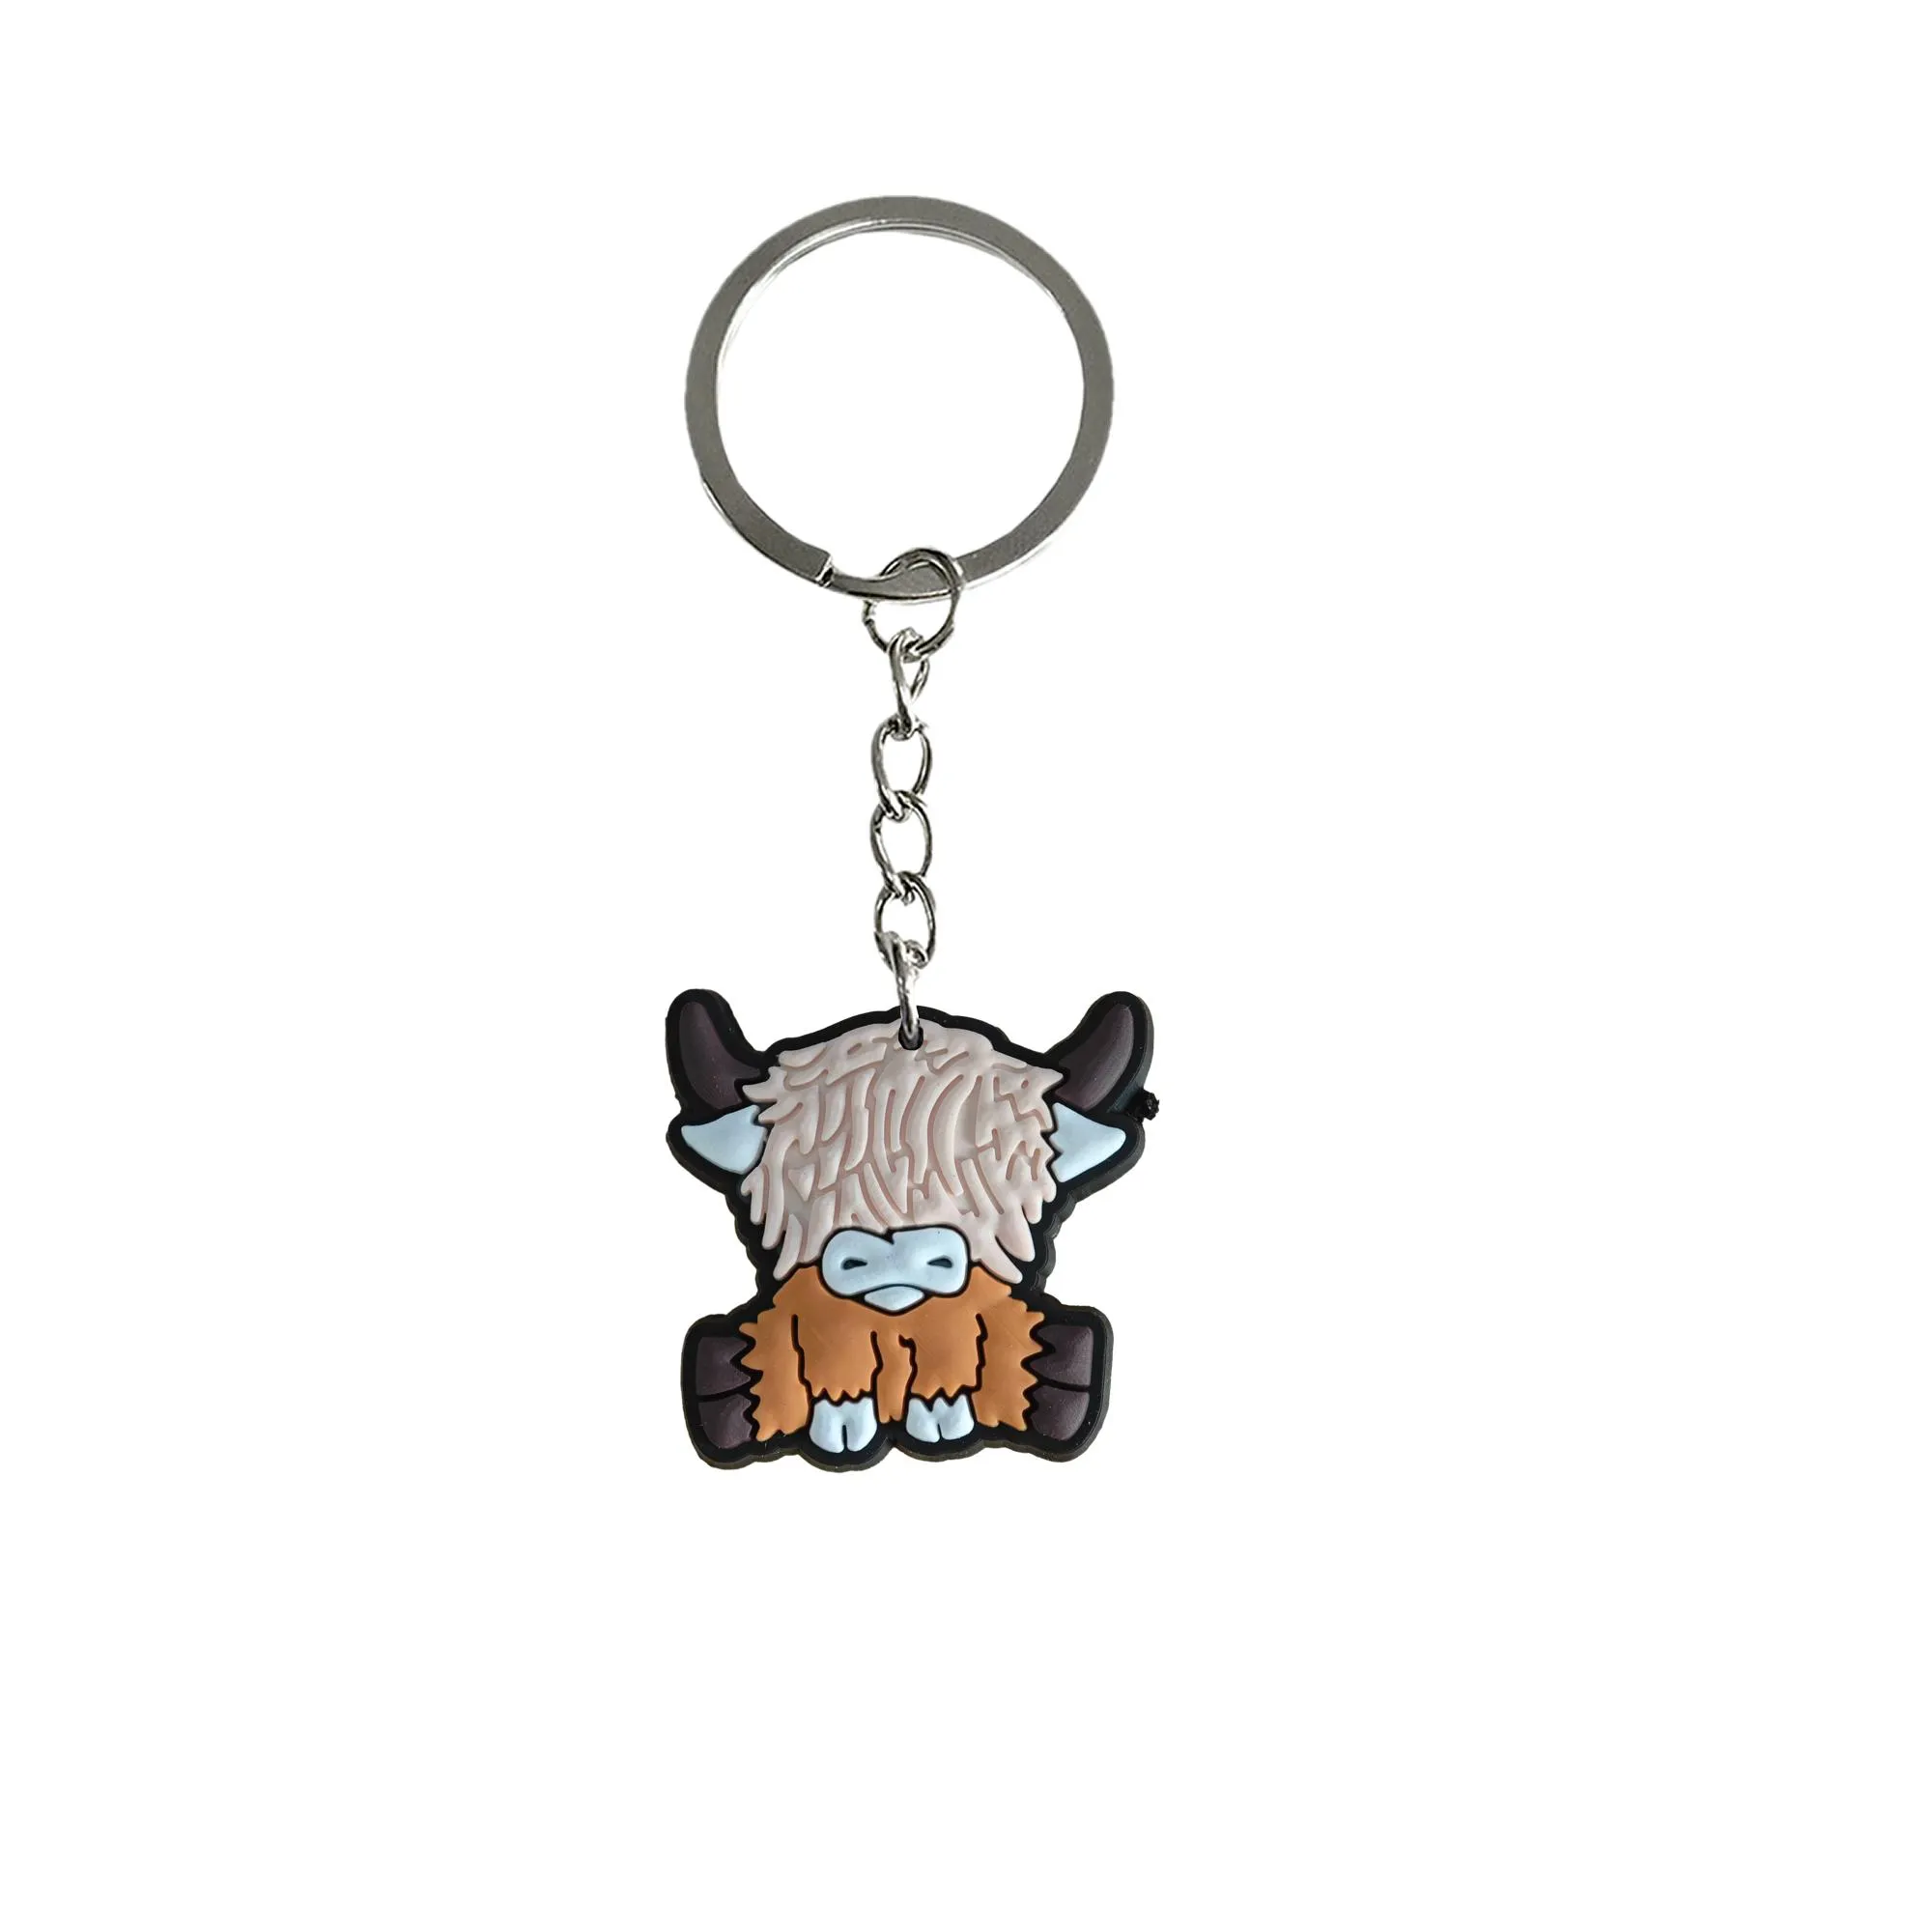 sheep keychain keychains for childrens party favors key chain gift keyring suitable schoolbag men tags goodie bag stuffer christmas gifts ring boys